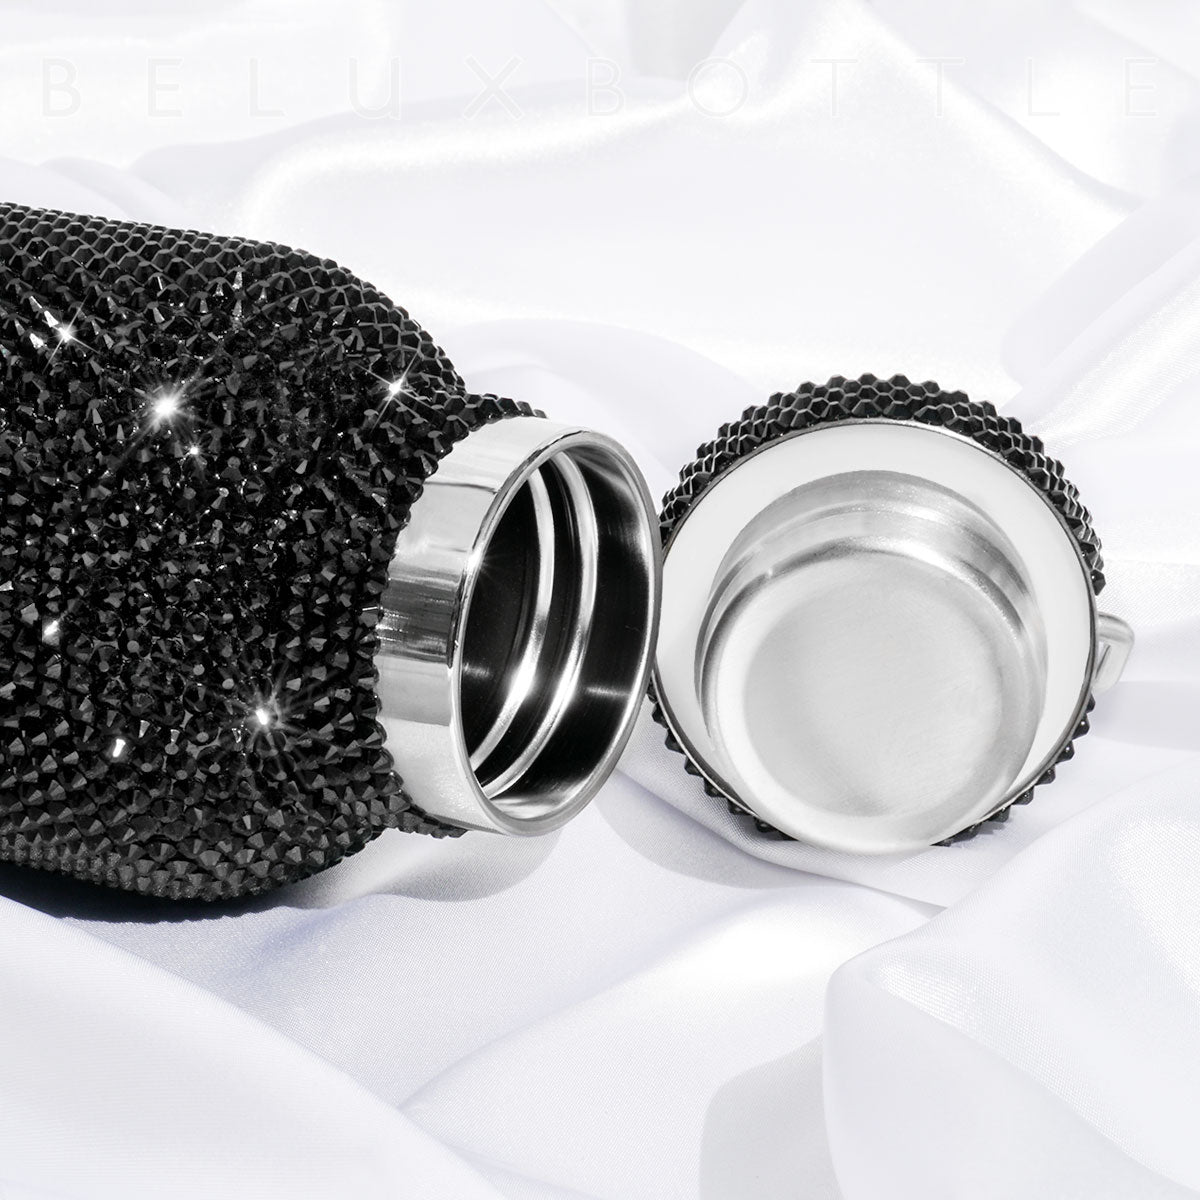 Close-up of Black Diamond Drink Bottle Neck with Stainless Steel Blinged-Out Bottle Cap